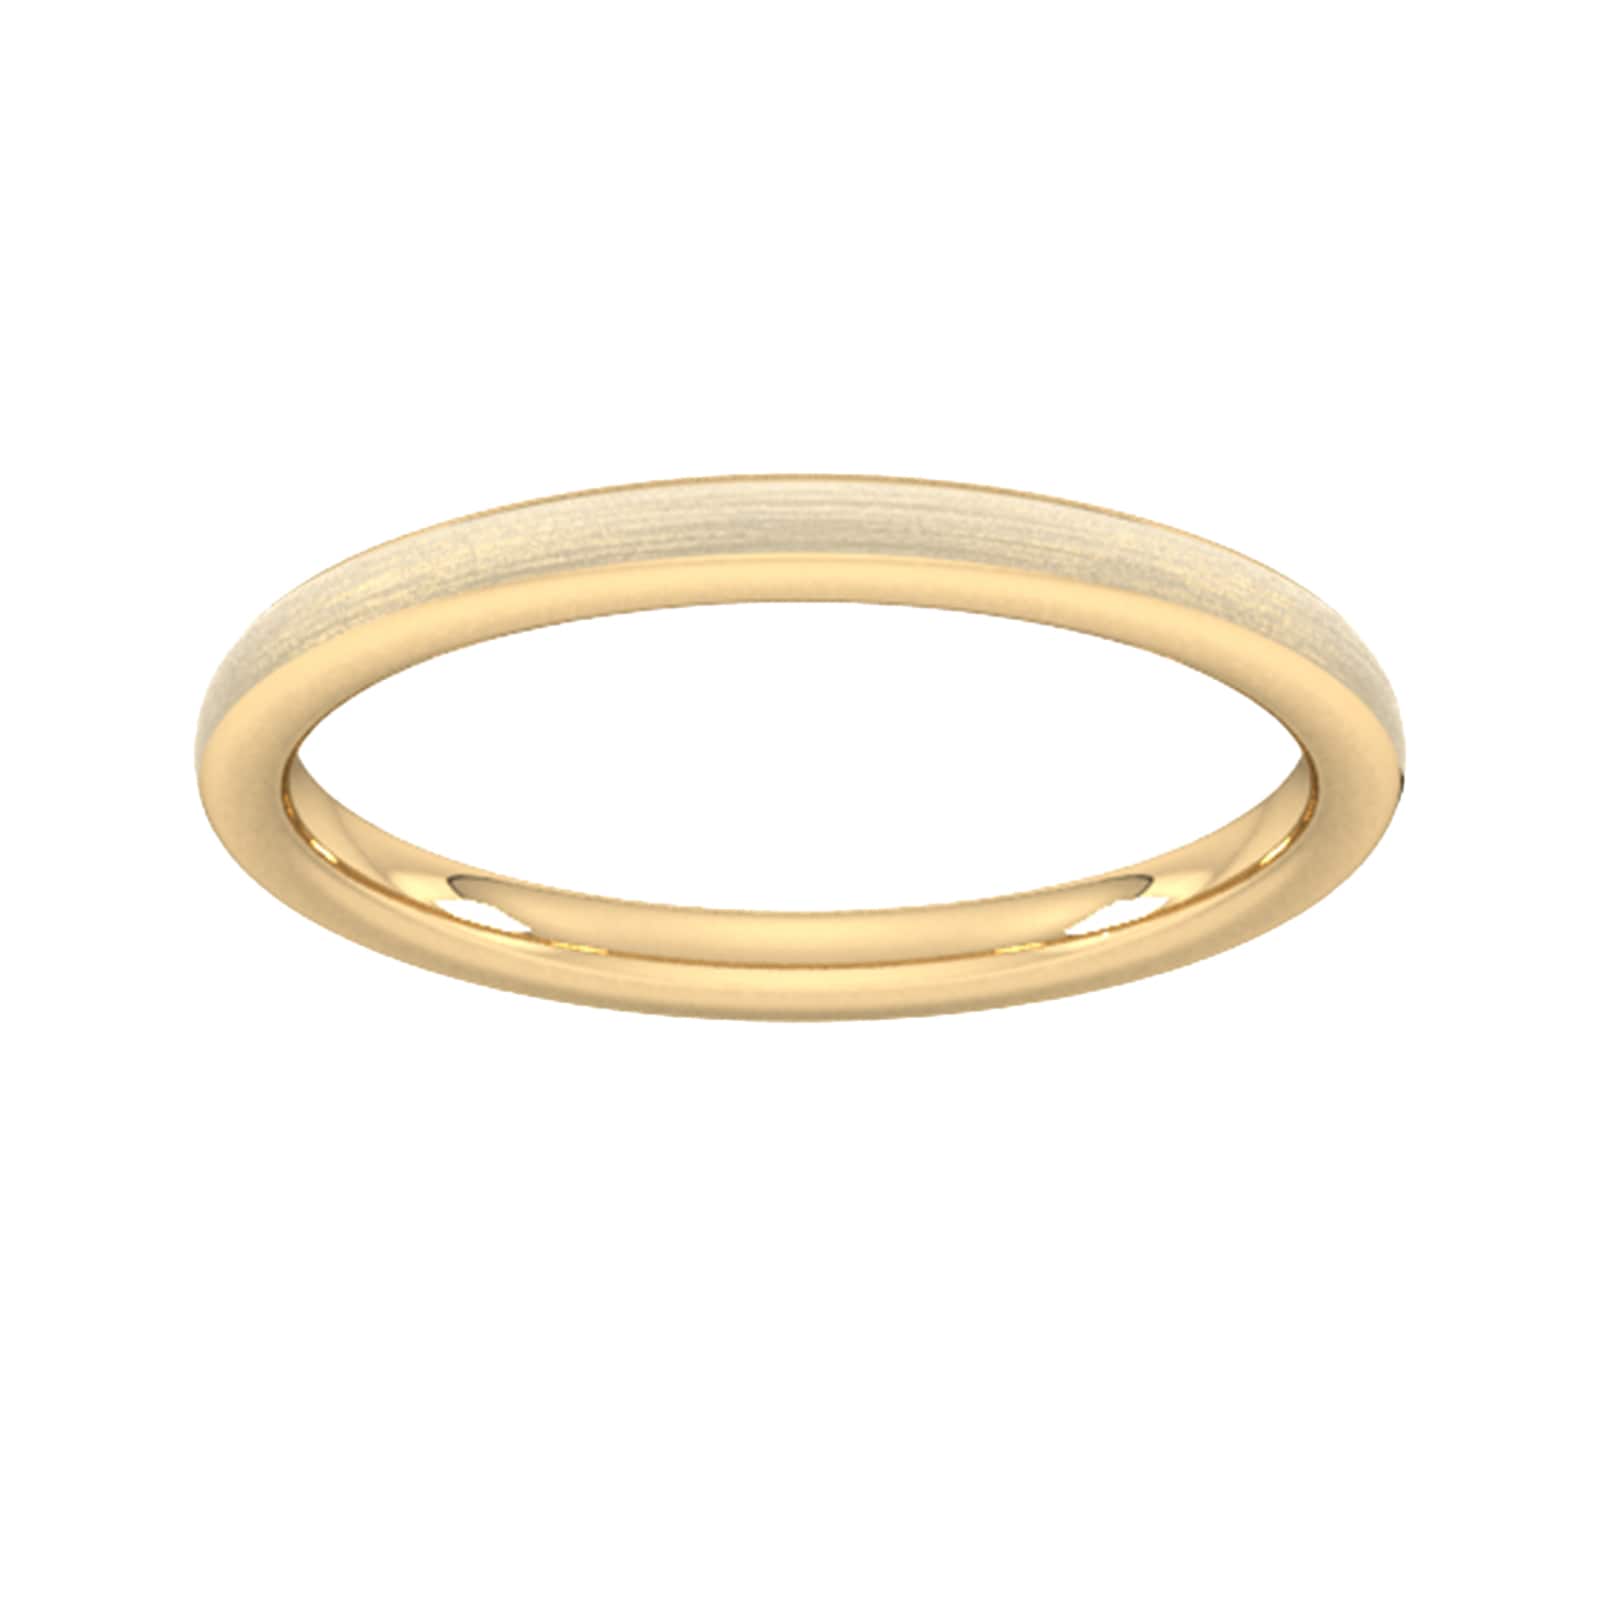 2mm Traditional Court Standard Matt Finished Wedding Ring In 9 Carat Yellow Gold - Ring Size P